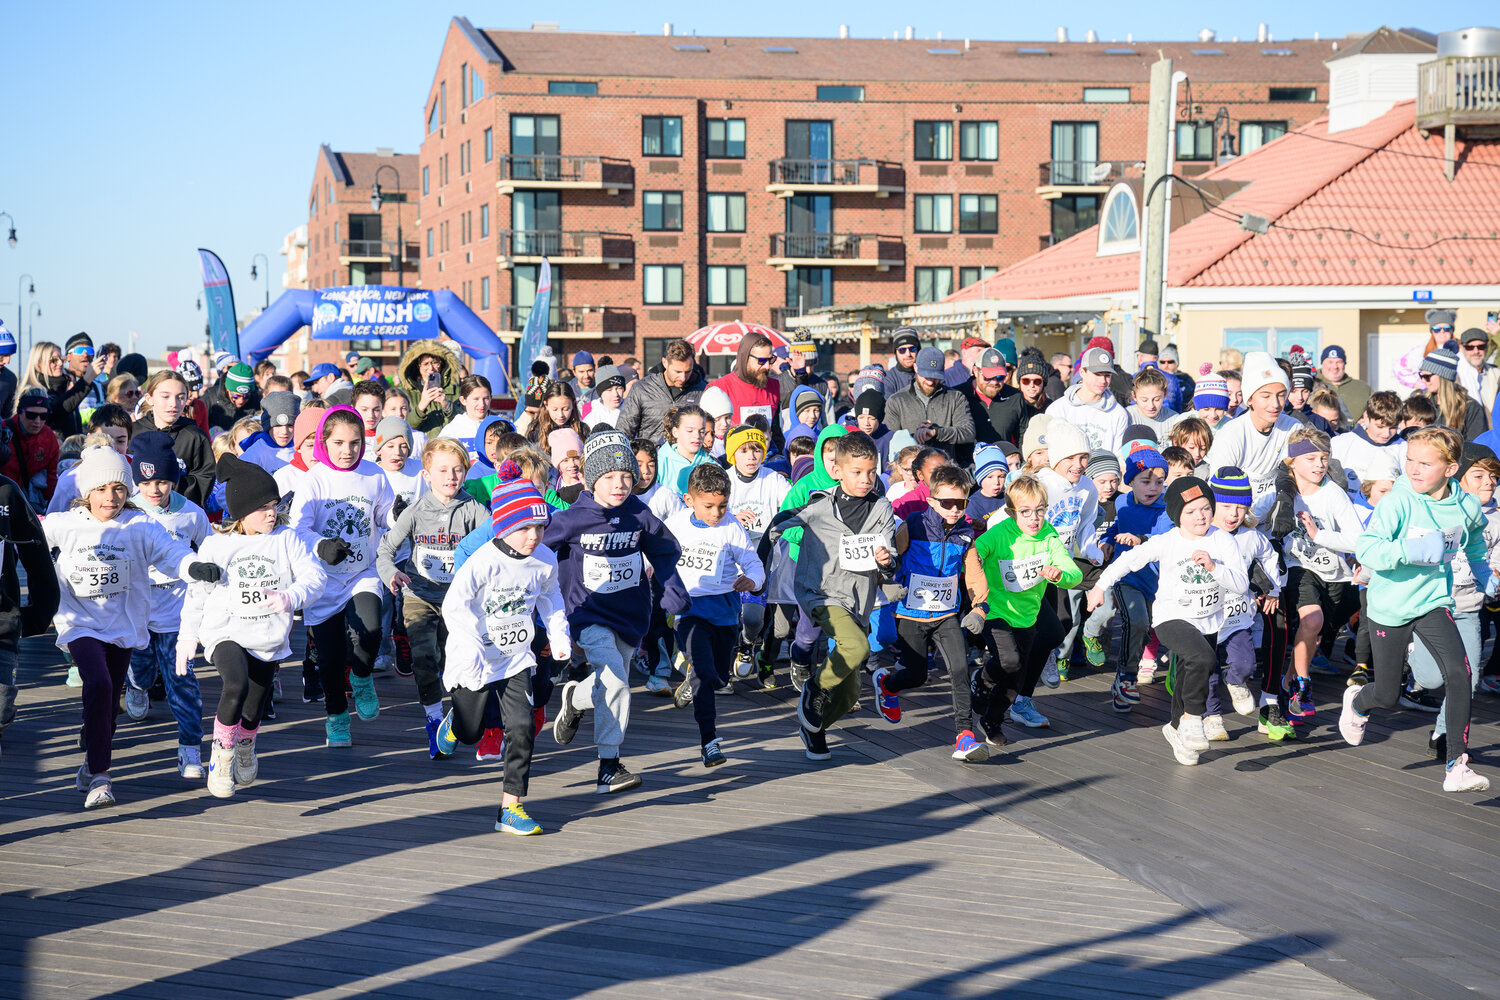 The children’s race took off first Sunday, drawing a large number of young marathoners.